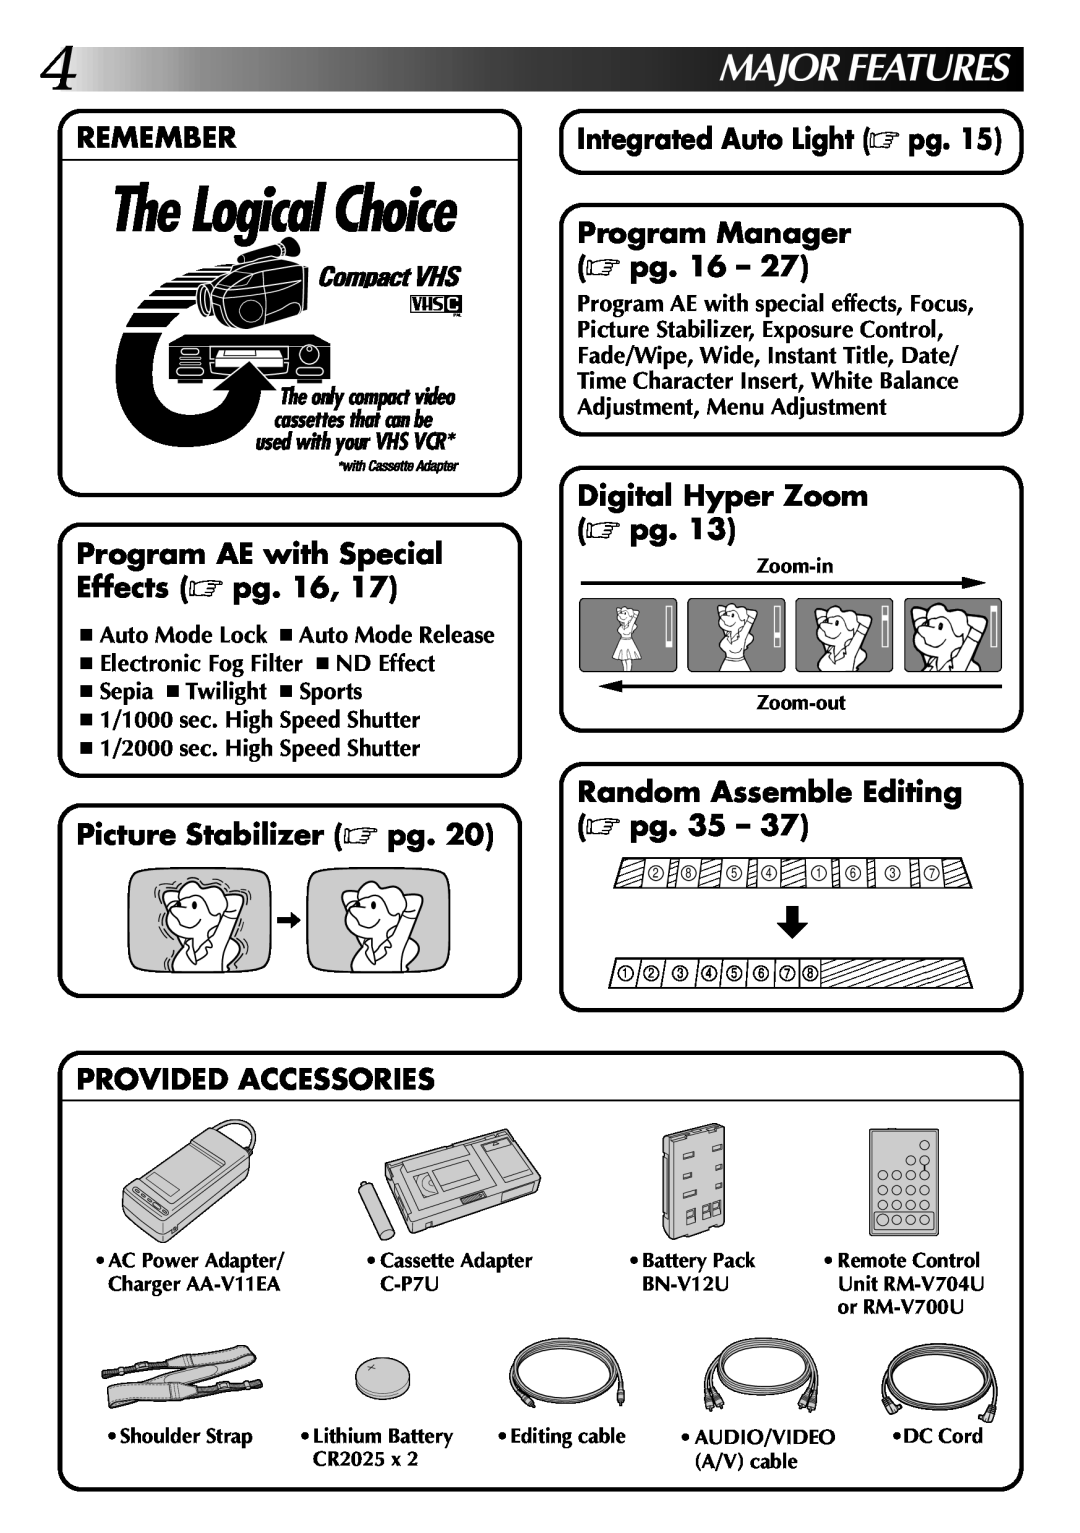 JVC LYT0002-048A Majorfeatures, Remember, Program Manager pg. 16, Program AE with Special Effects pg. 16, Zoom-in Zoom-out 